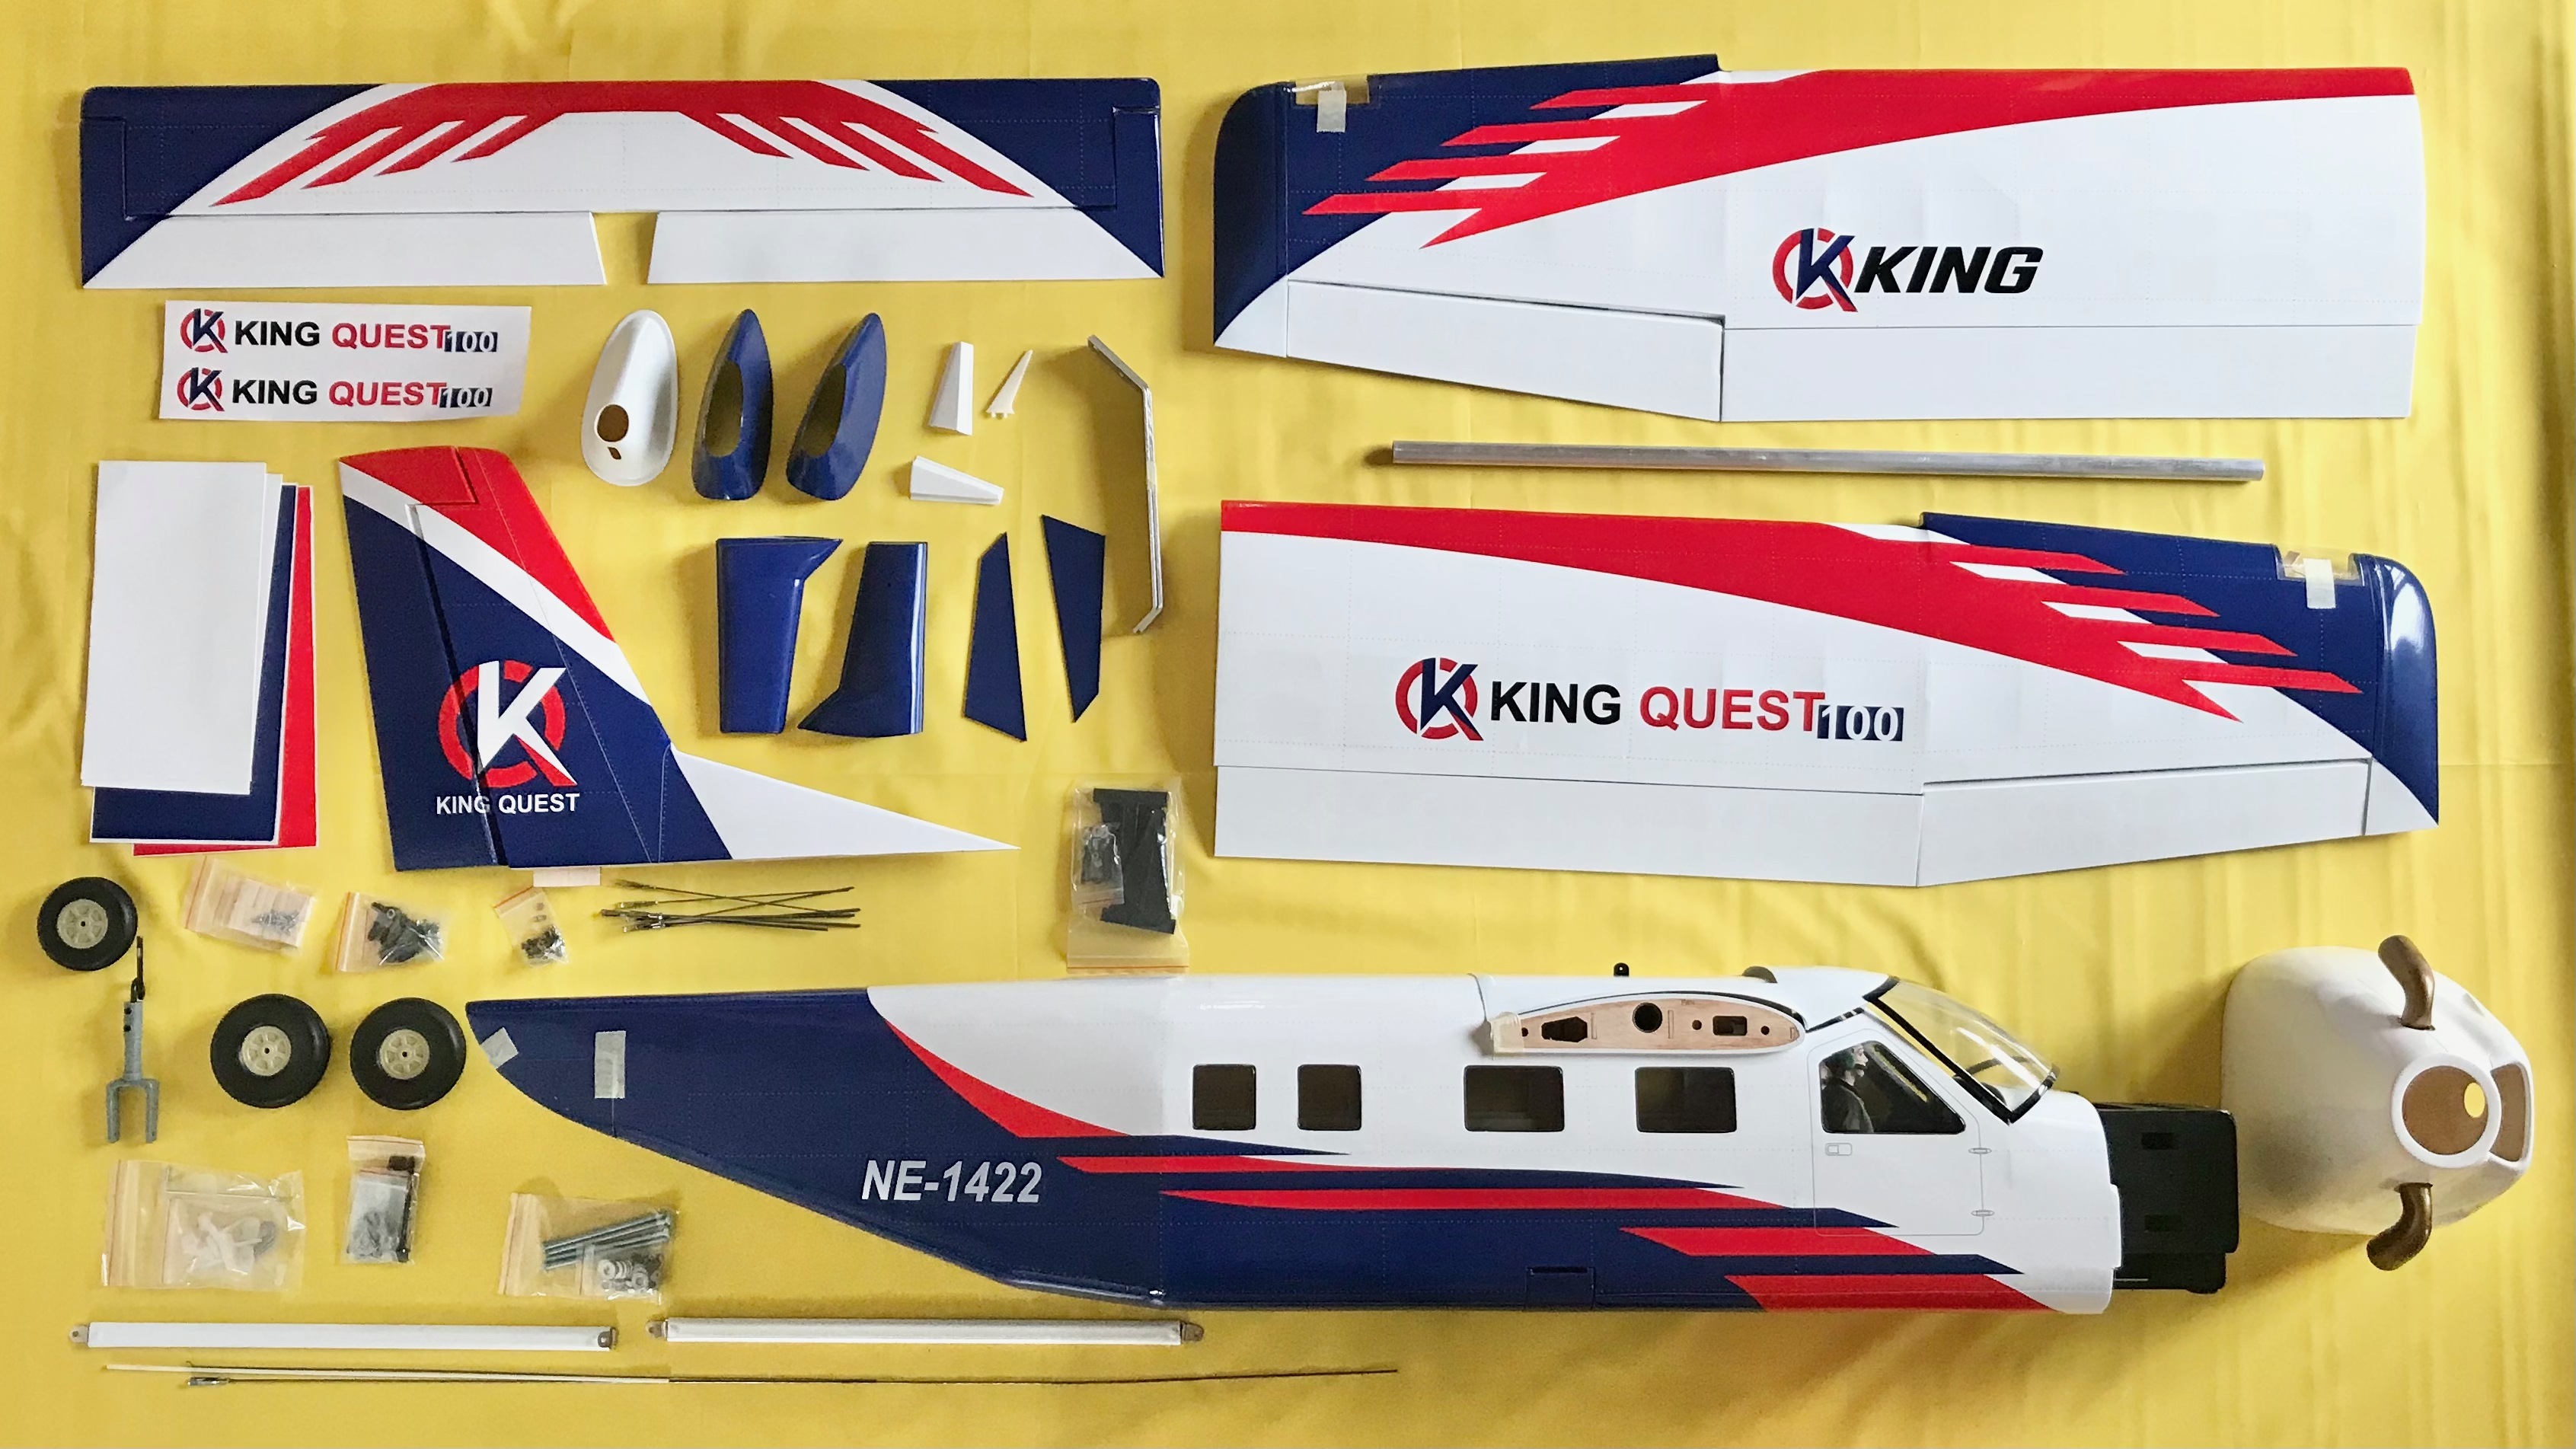 King Quest 100 STOL by VQ/Pichler